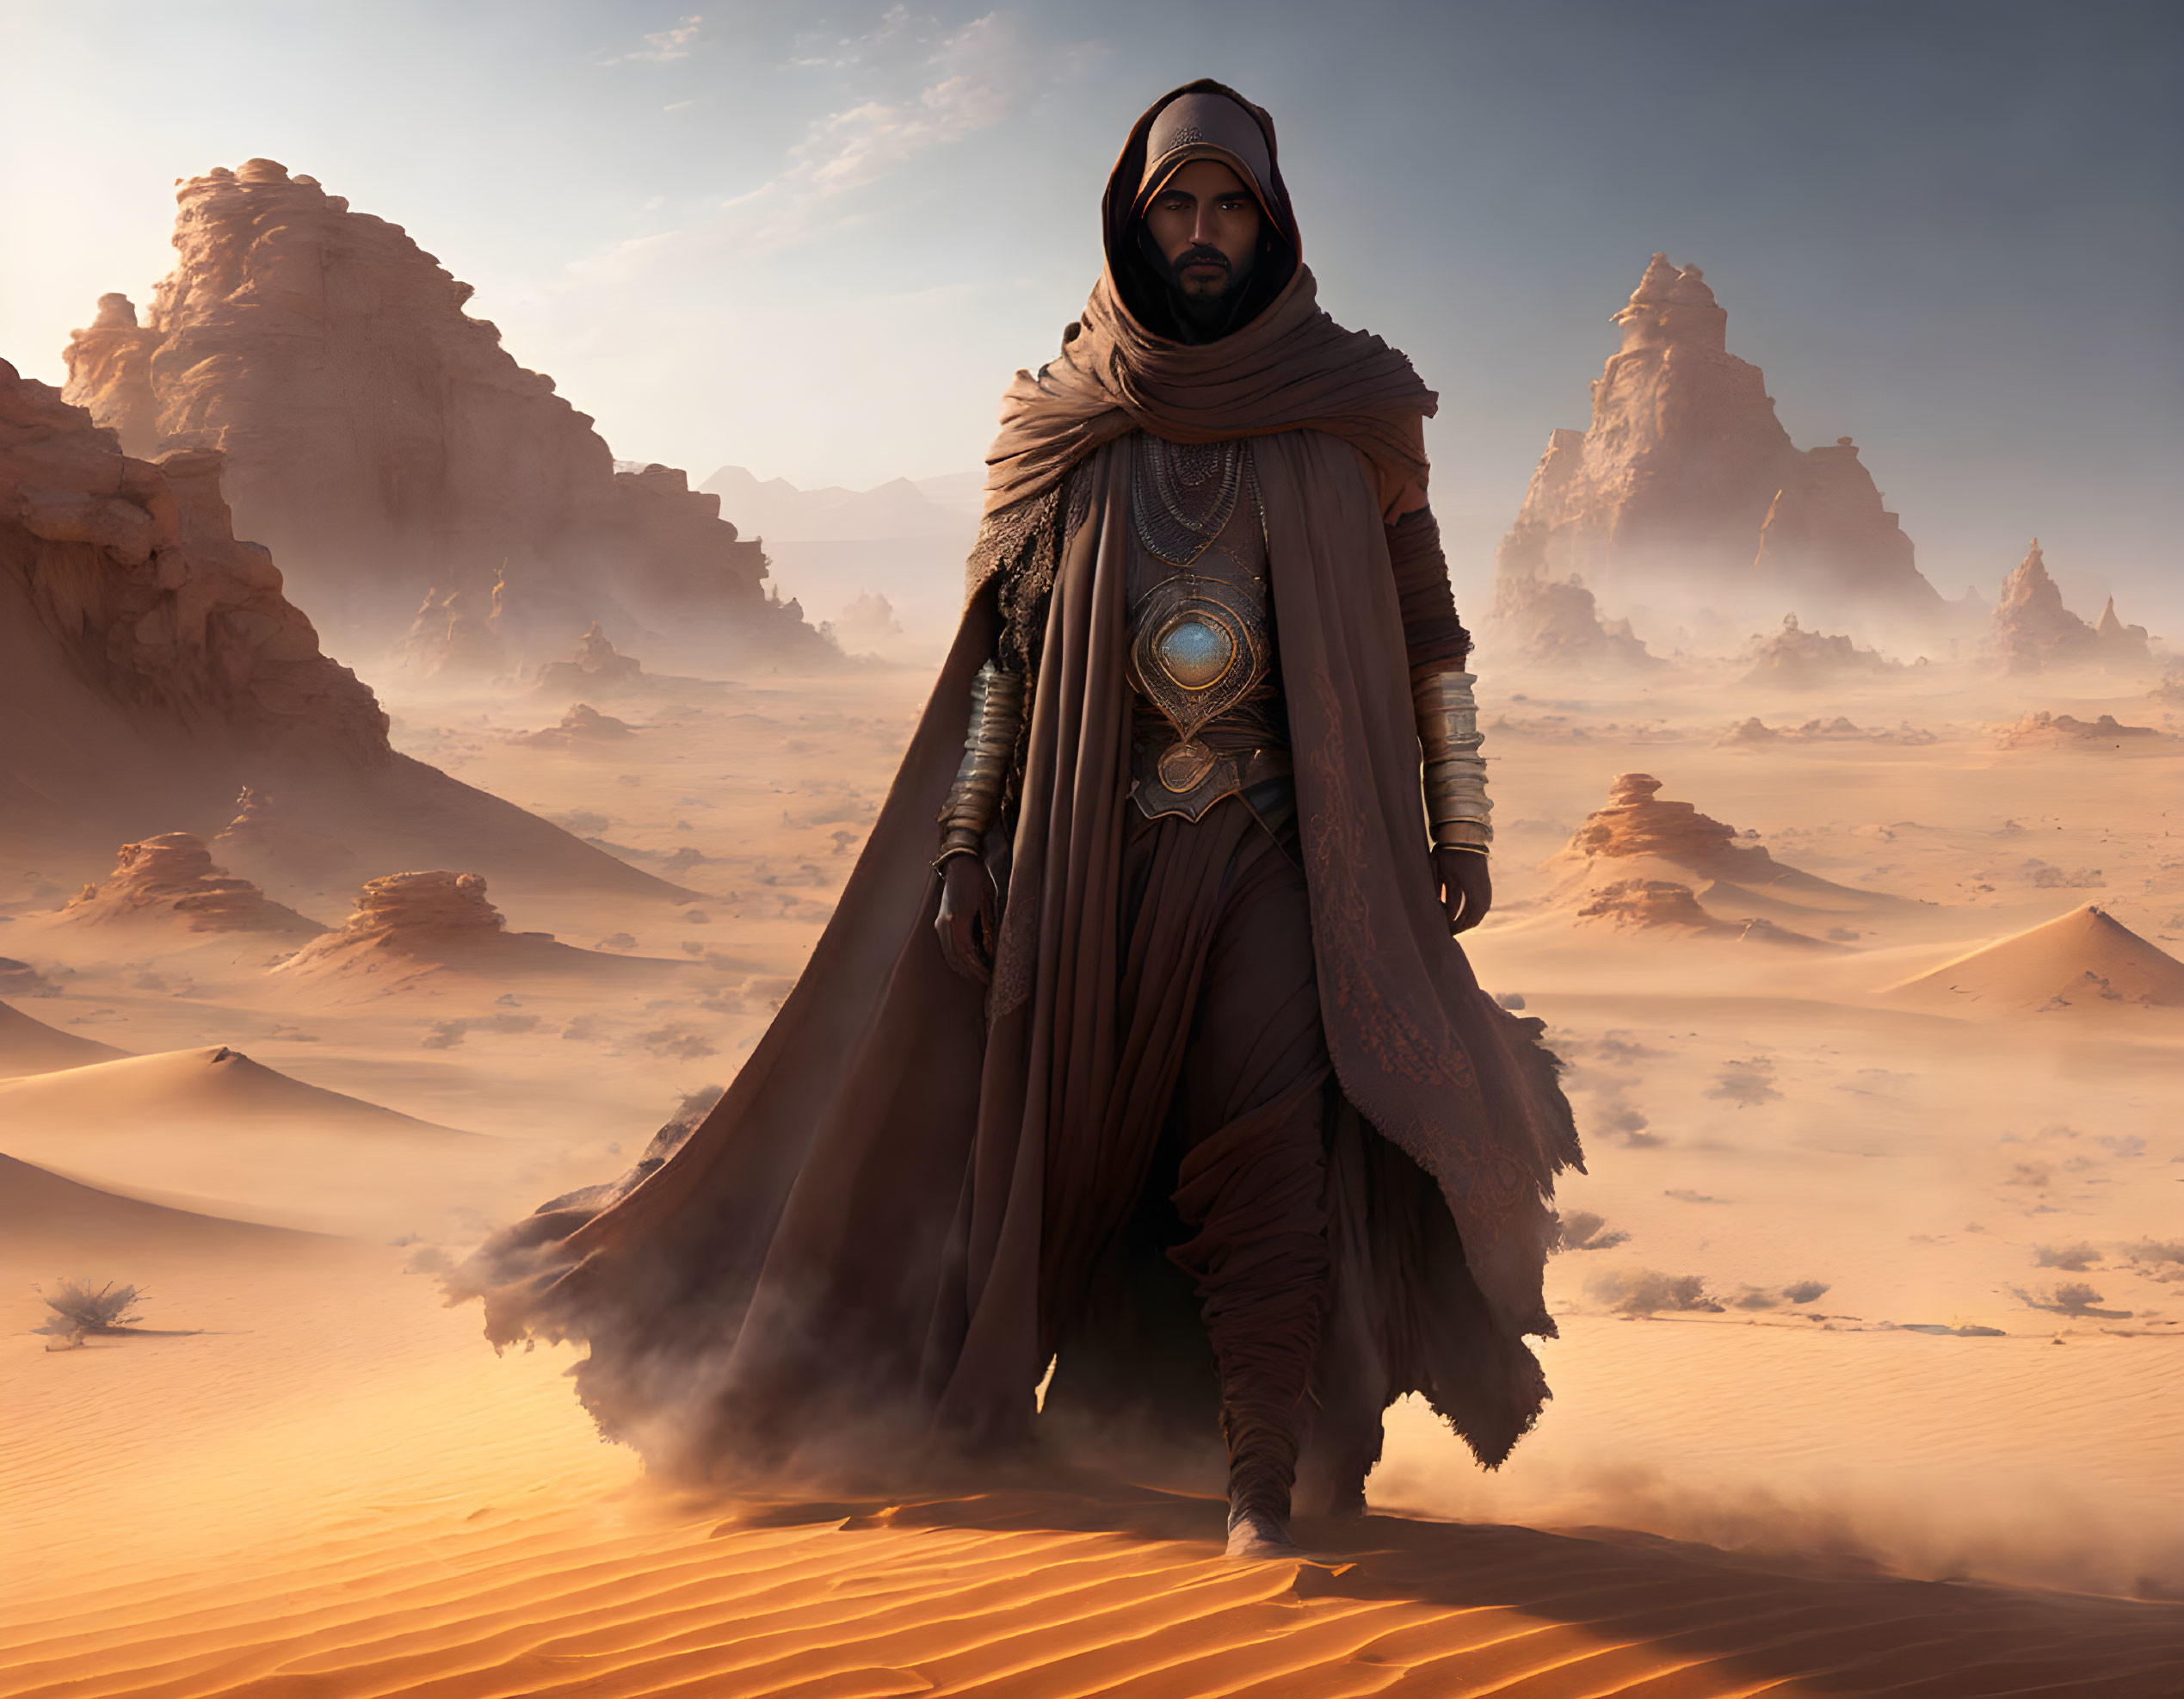 Robed Figure in Desert Landscape with Sand Dunes and Rock Formations